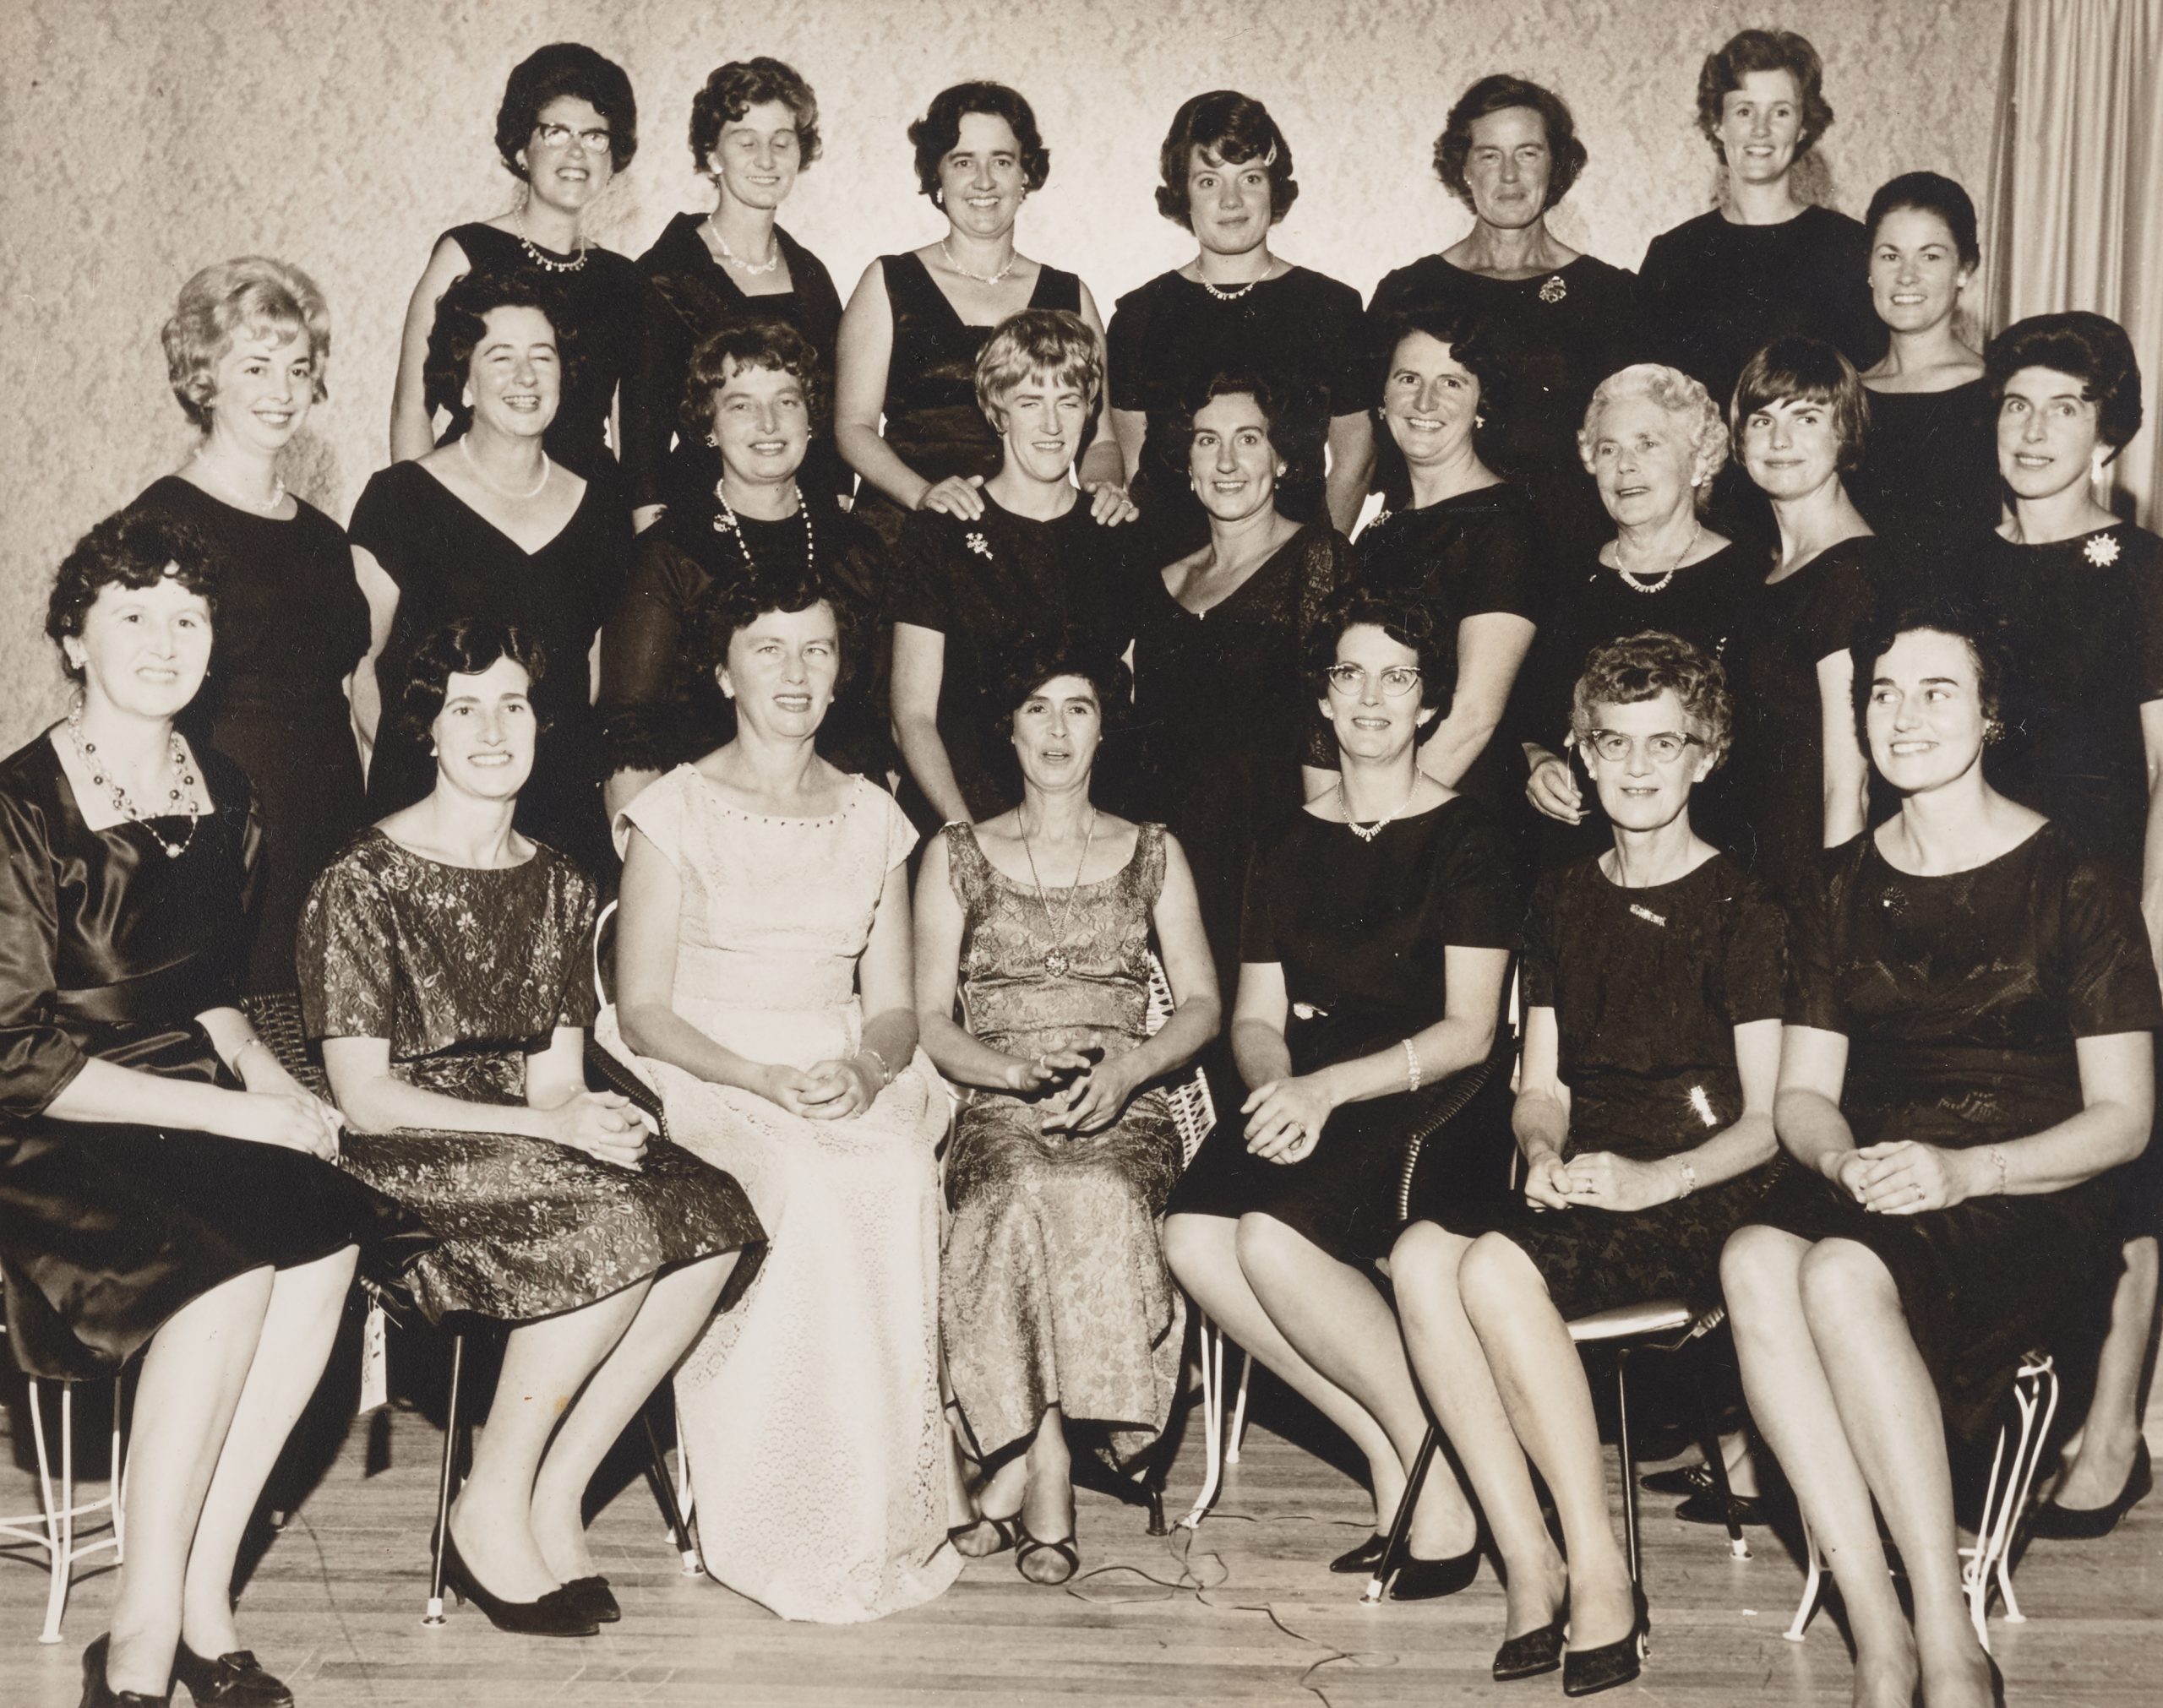 Twenty-three women in three rows are posing for a formal photograph. The conductor and accompanist are seated in the front row. Lesley, standing on a riser in the back row is wearing a sleeveless black dress with a necklace